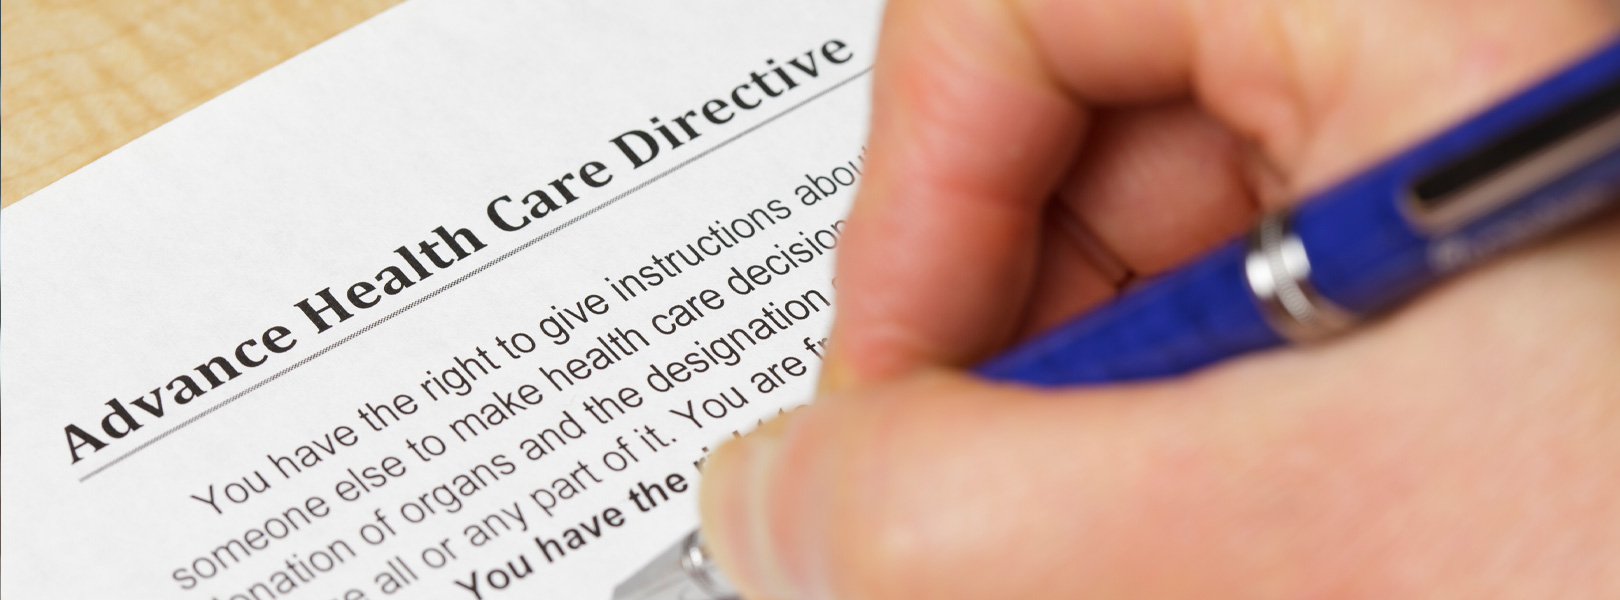 Individual filling out an advance care directive